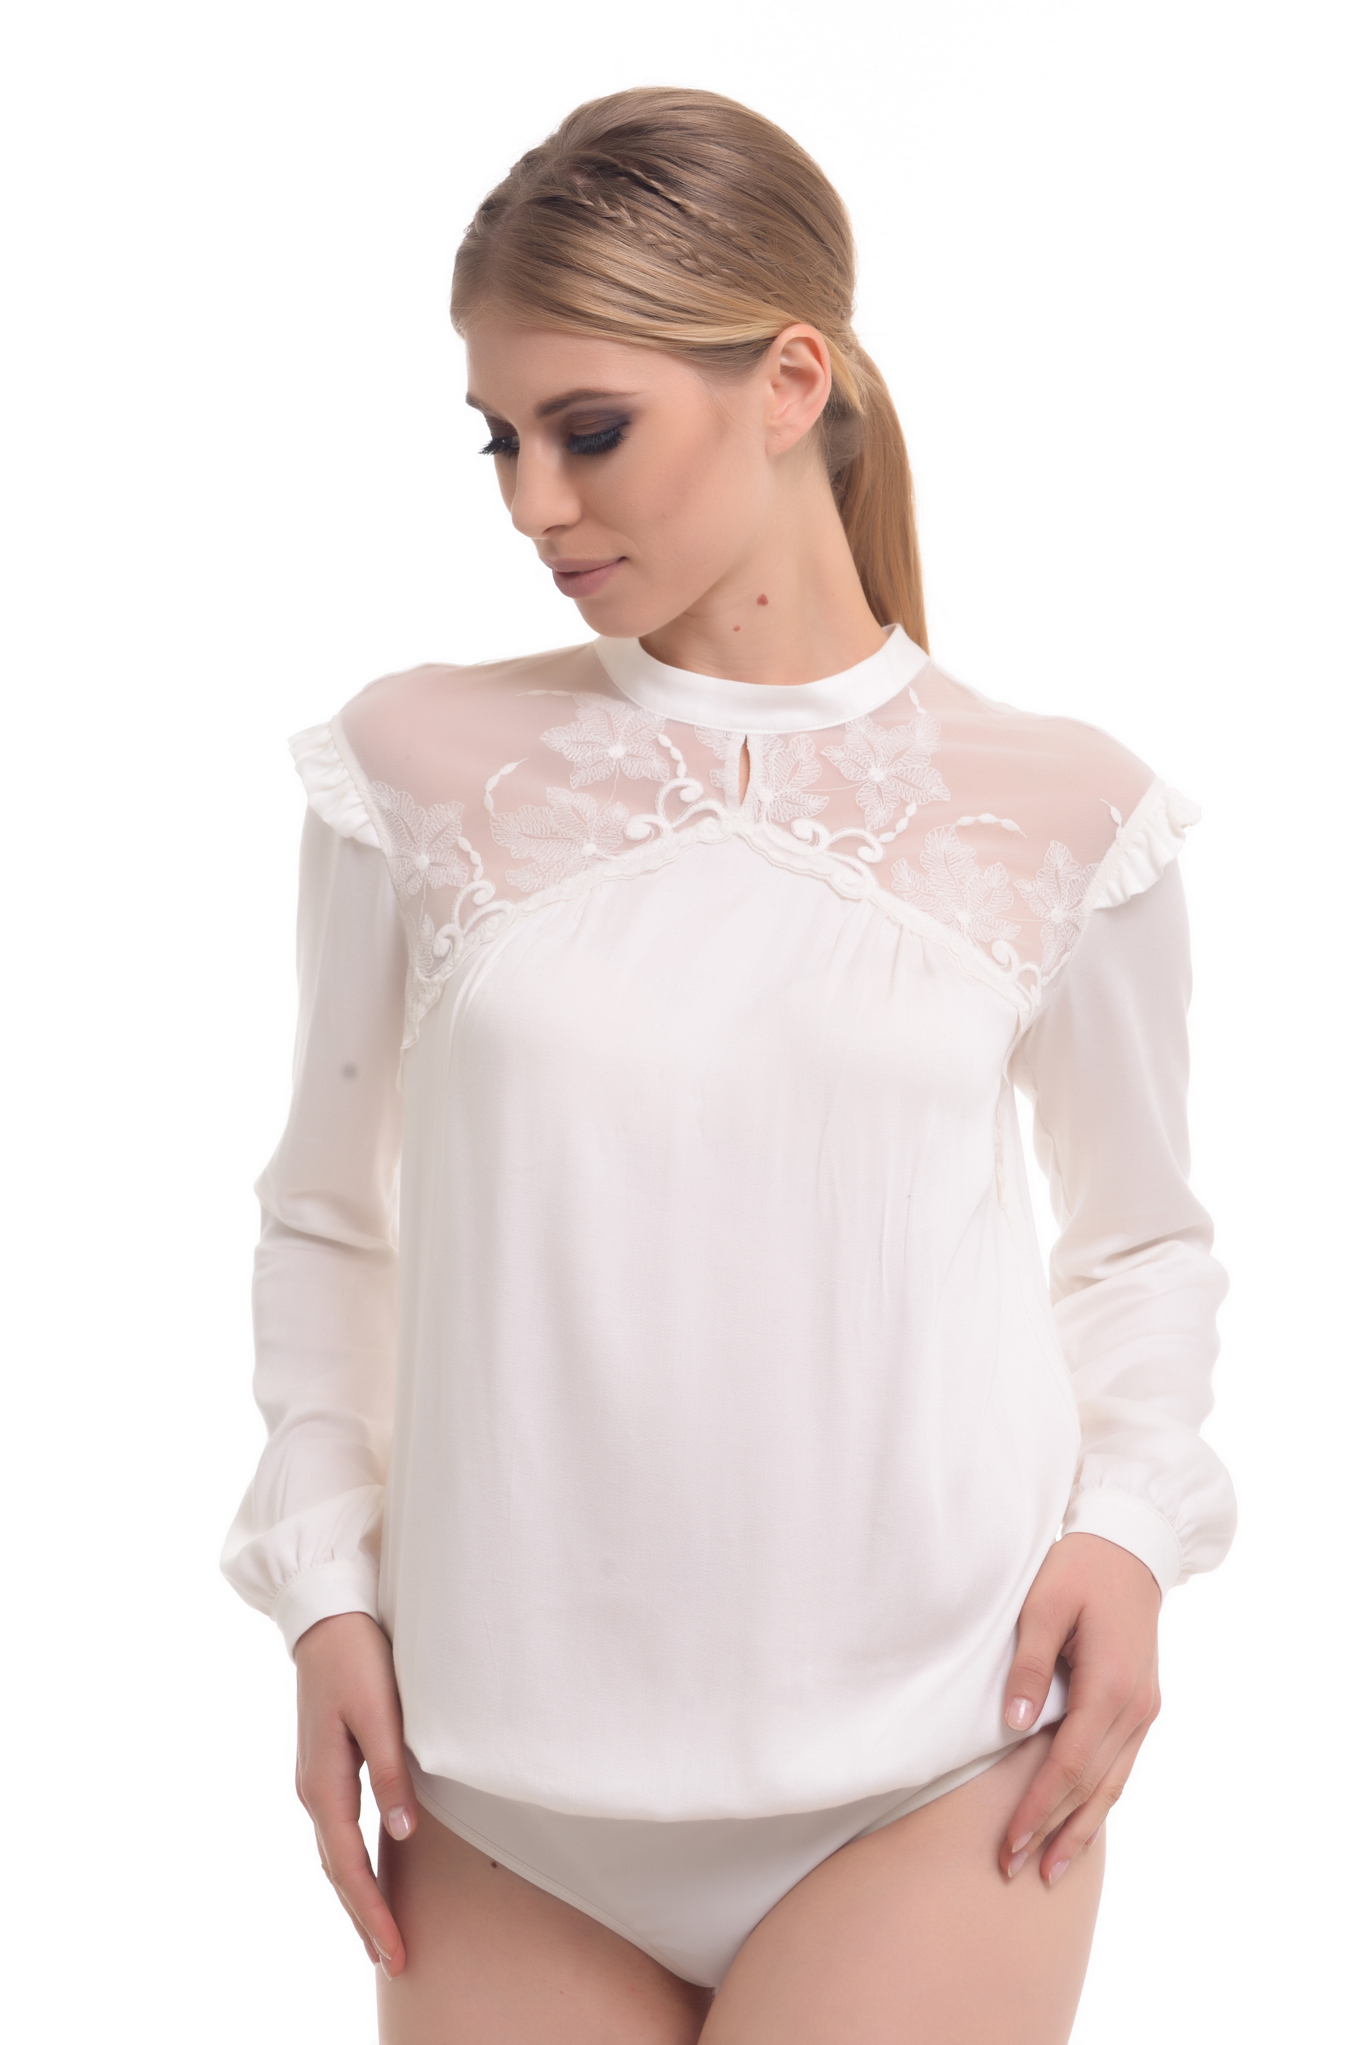 Buy Women White blouse body for Summer, Long sleeve Business Office clothies by Arefeva